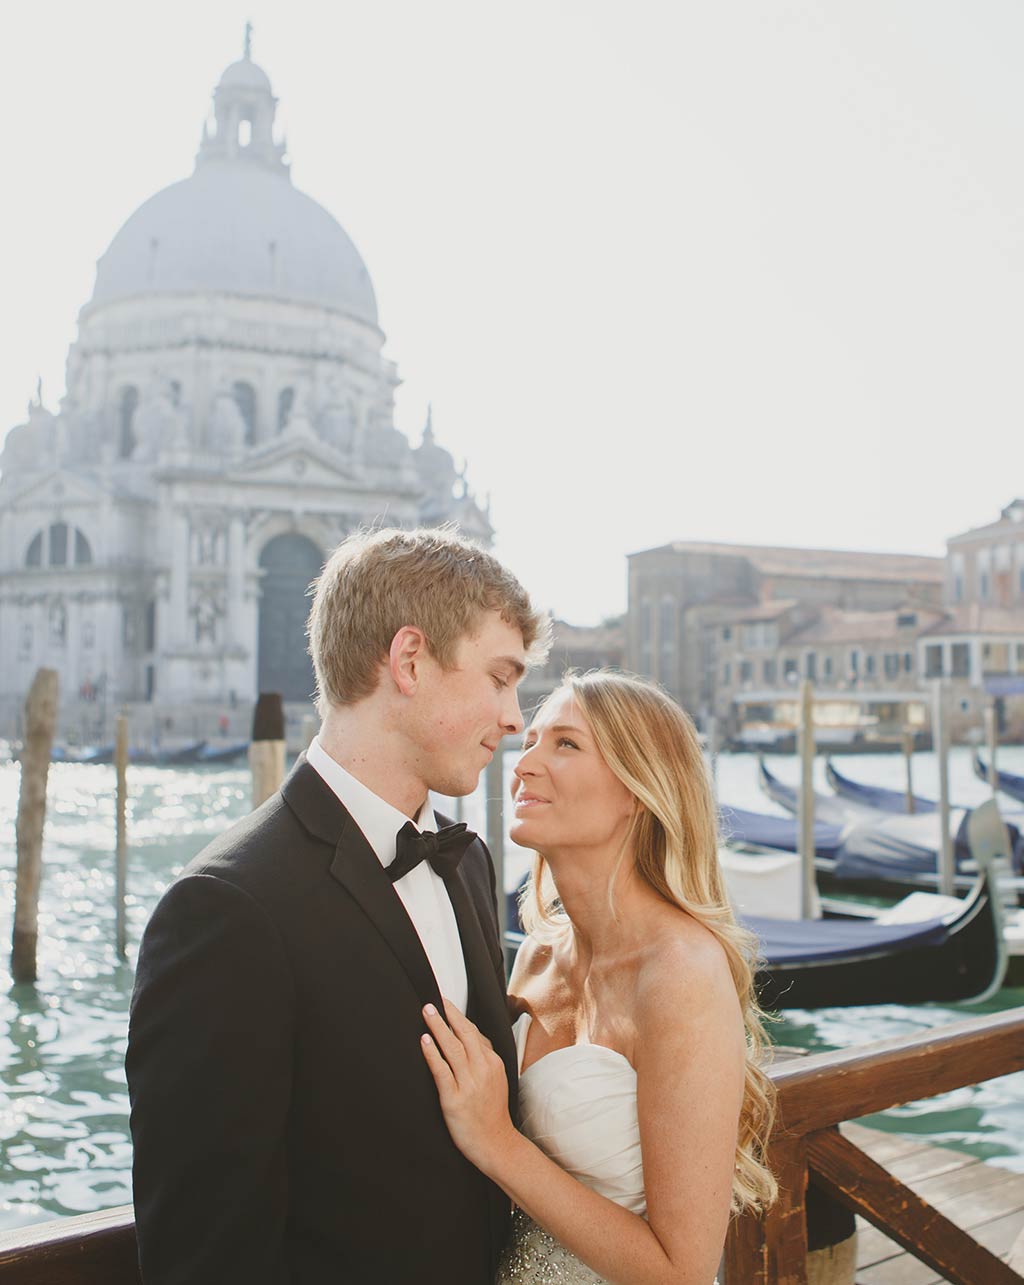 Tie the knot in Venice